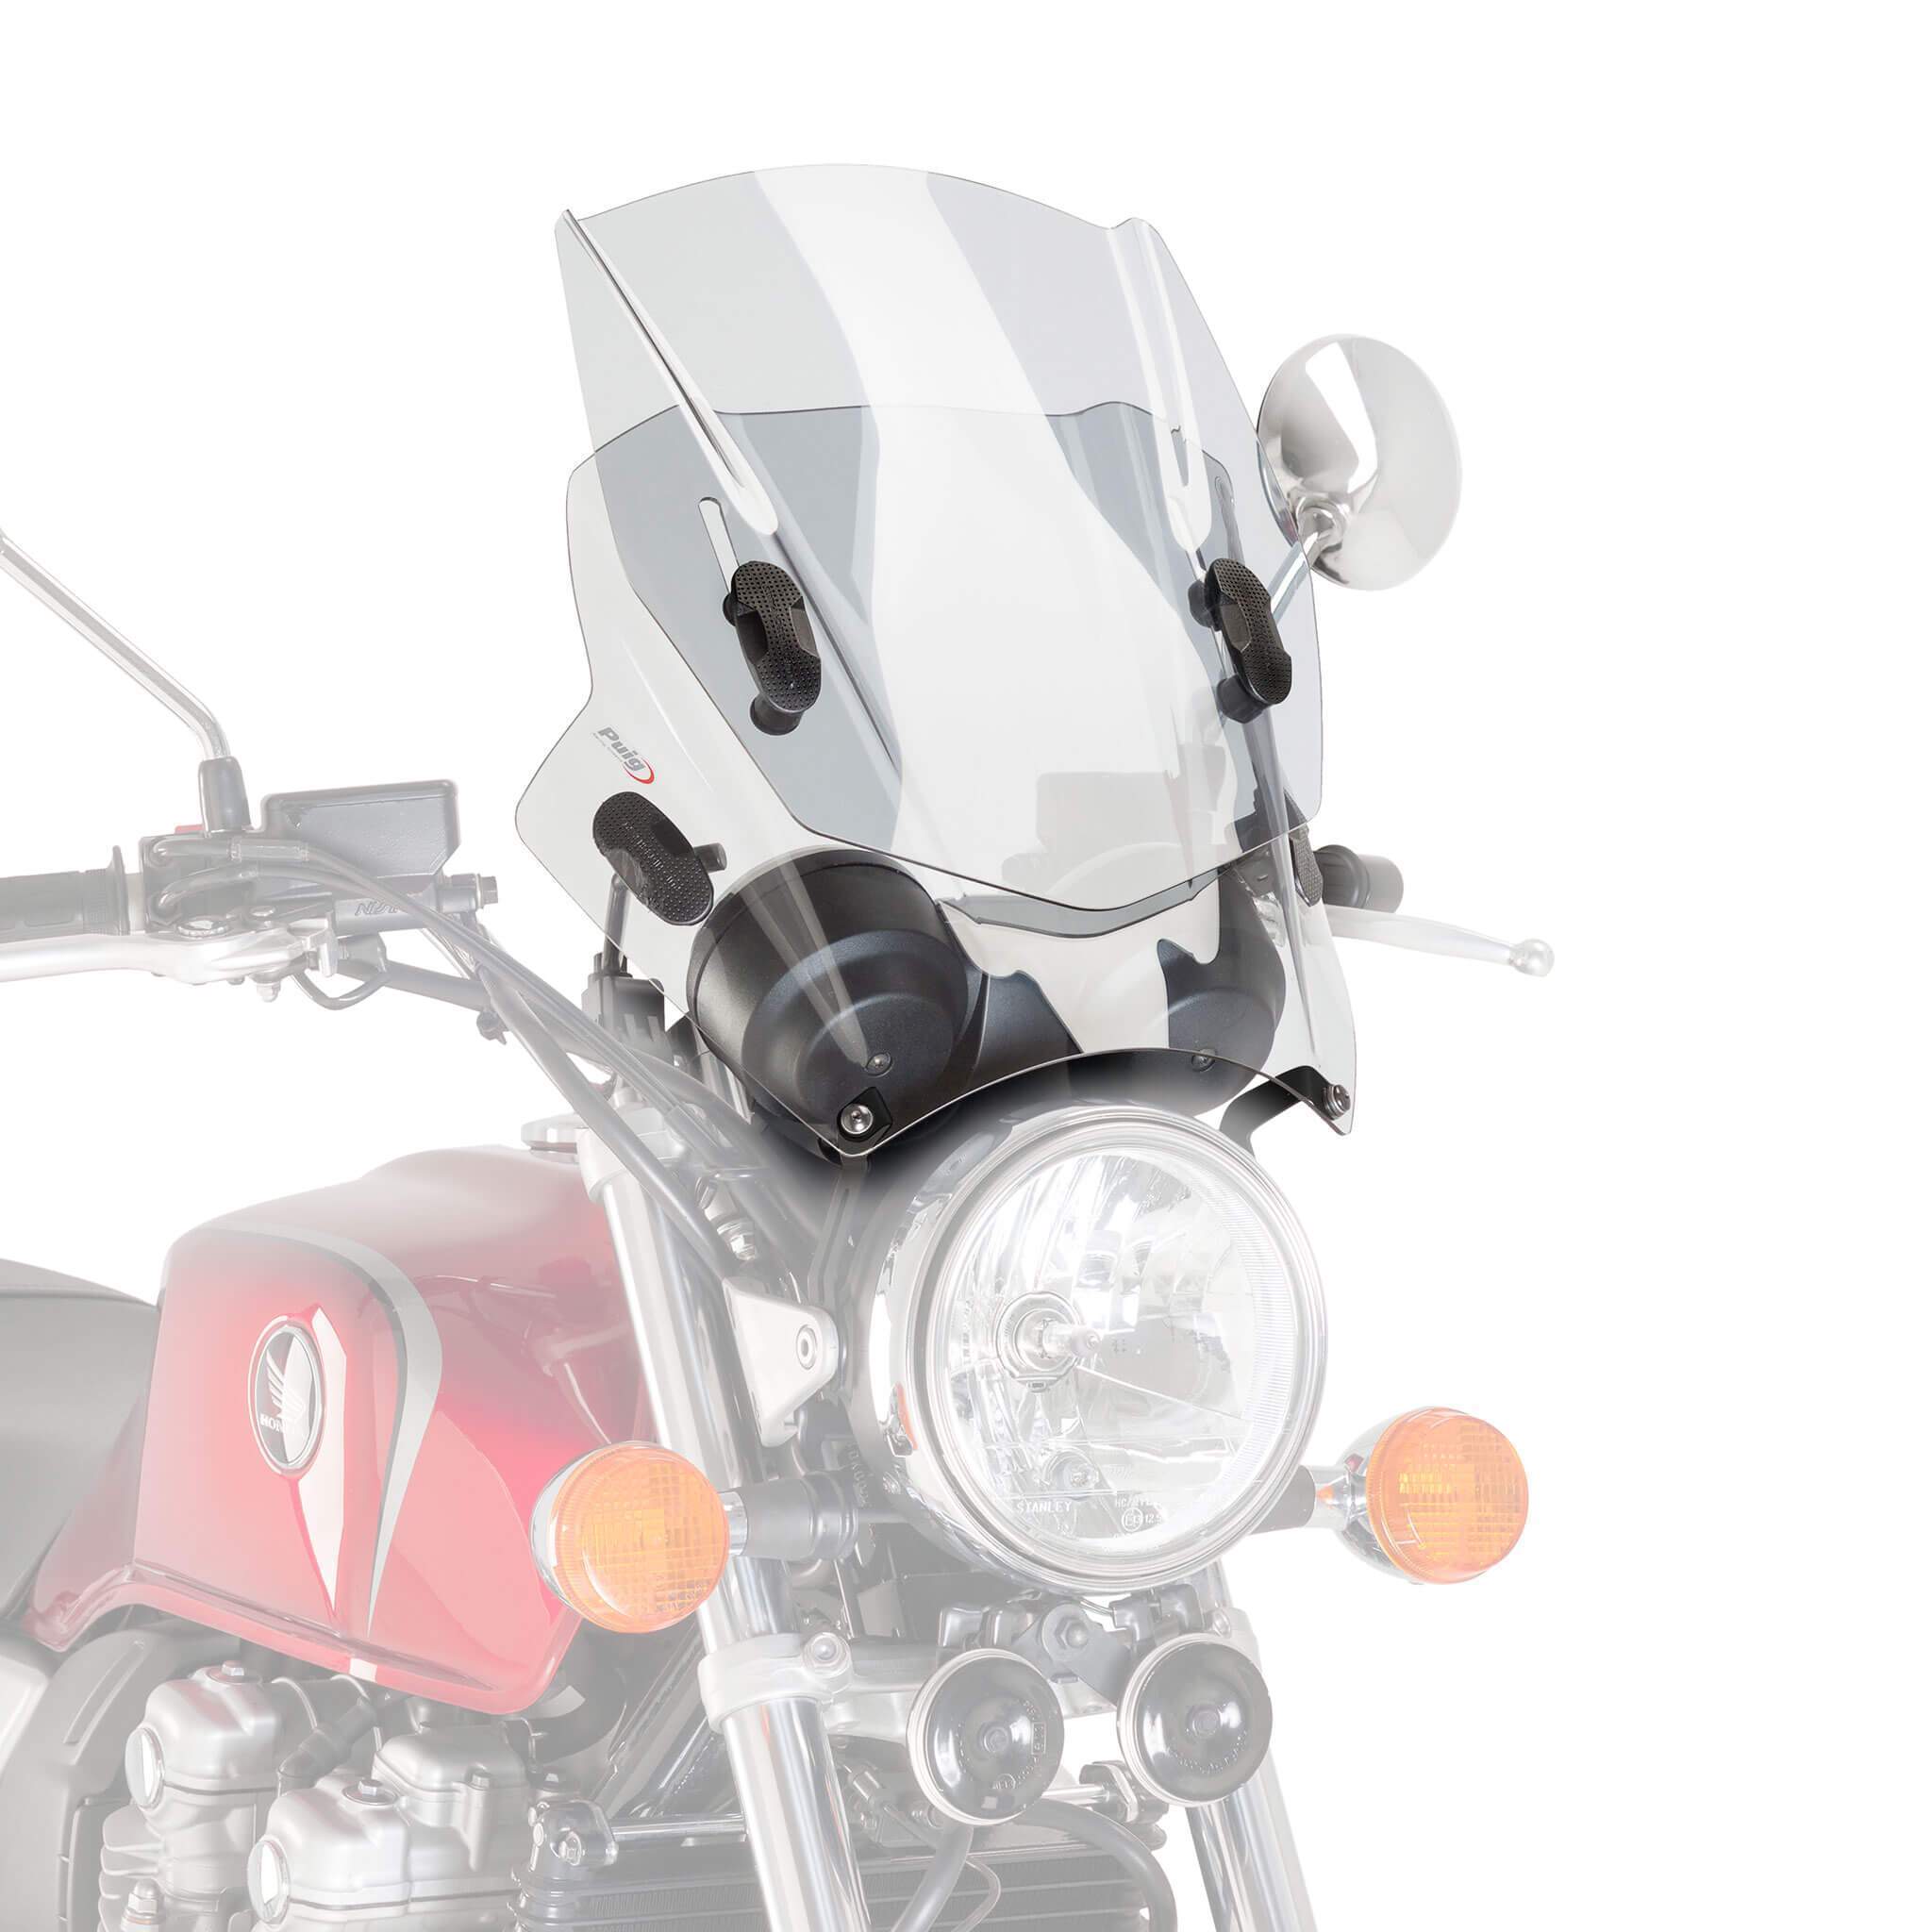 Puig Up & Down Screen | Clear | Suzuki GSF 1200 Bandit 1996>2005-M2193W-Screens-Pyramid Motorcycle Accessories